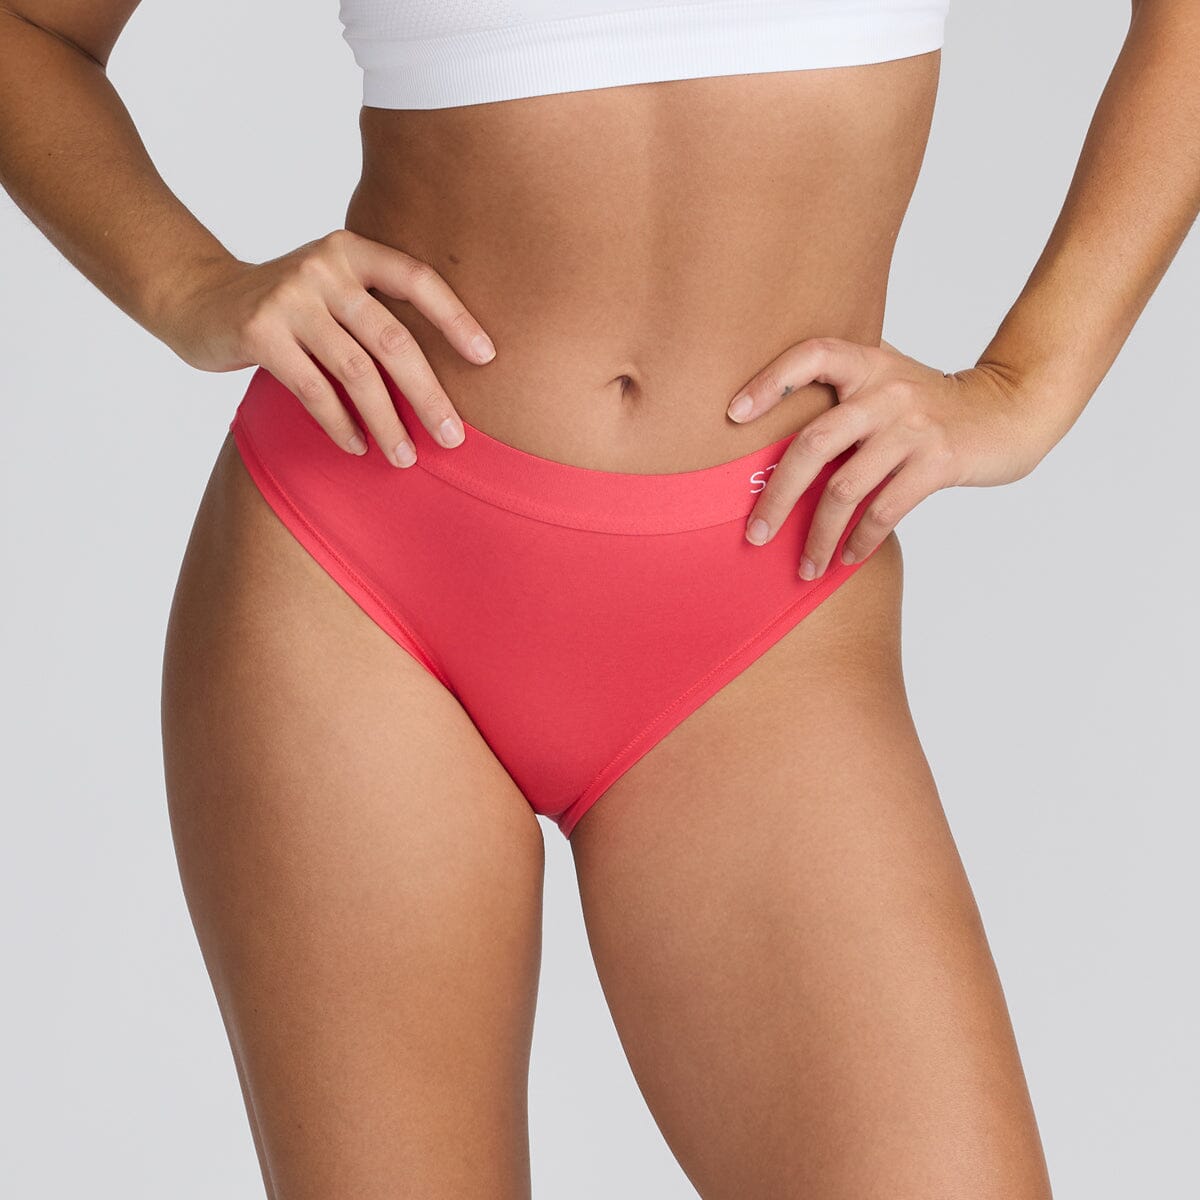 Red Women's Bamboo Underwear at Step One UK